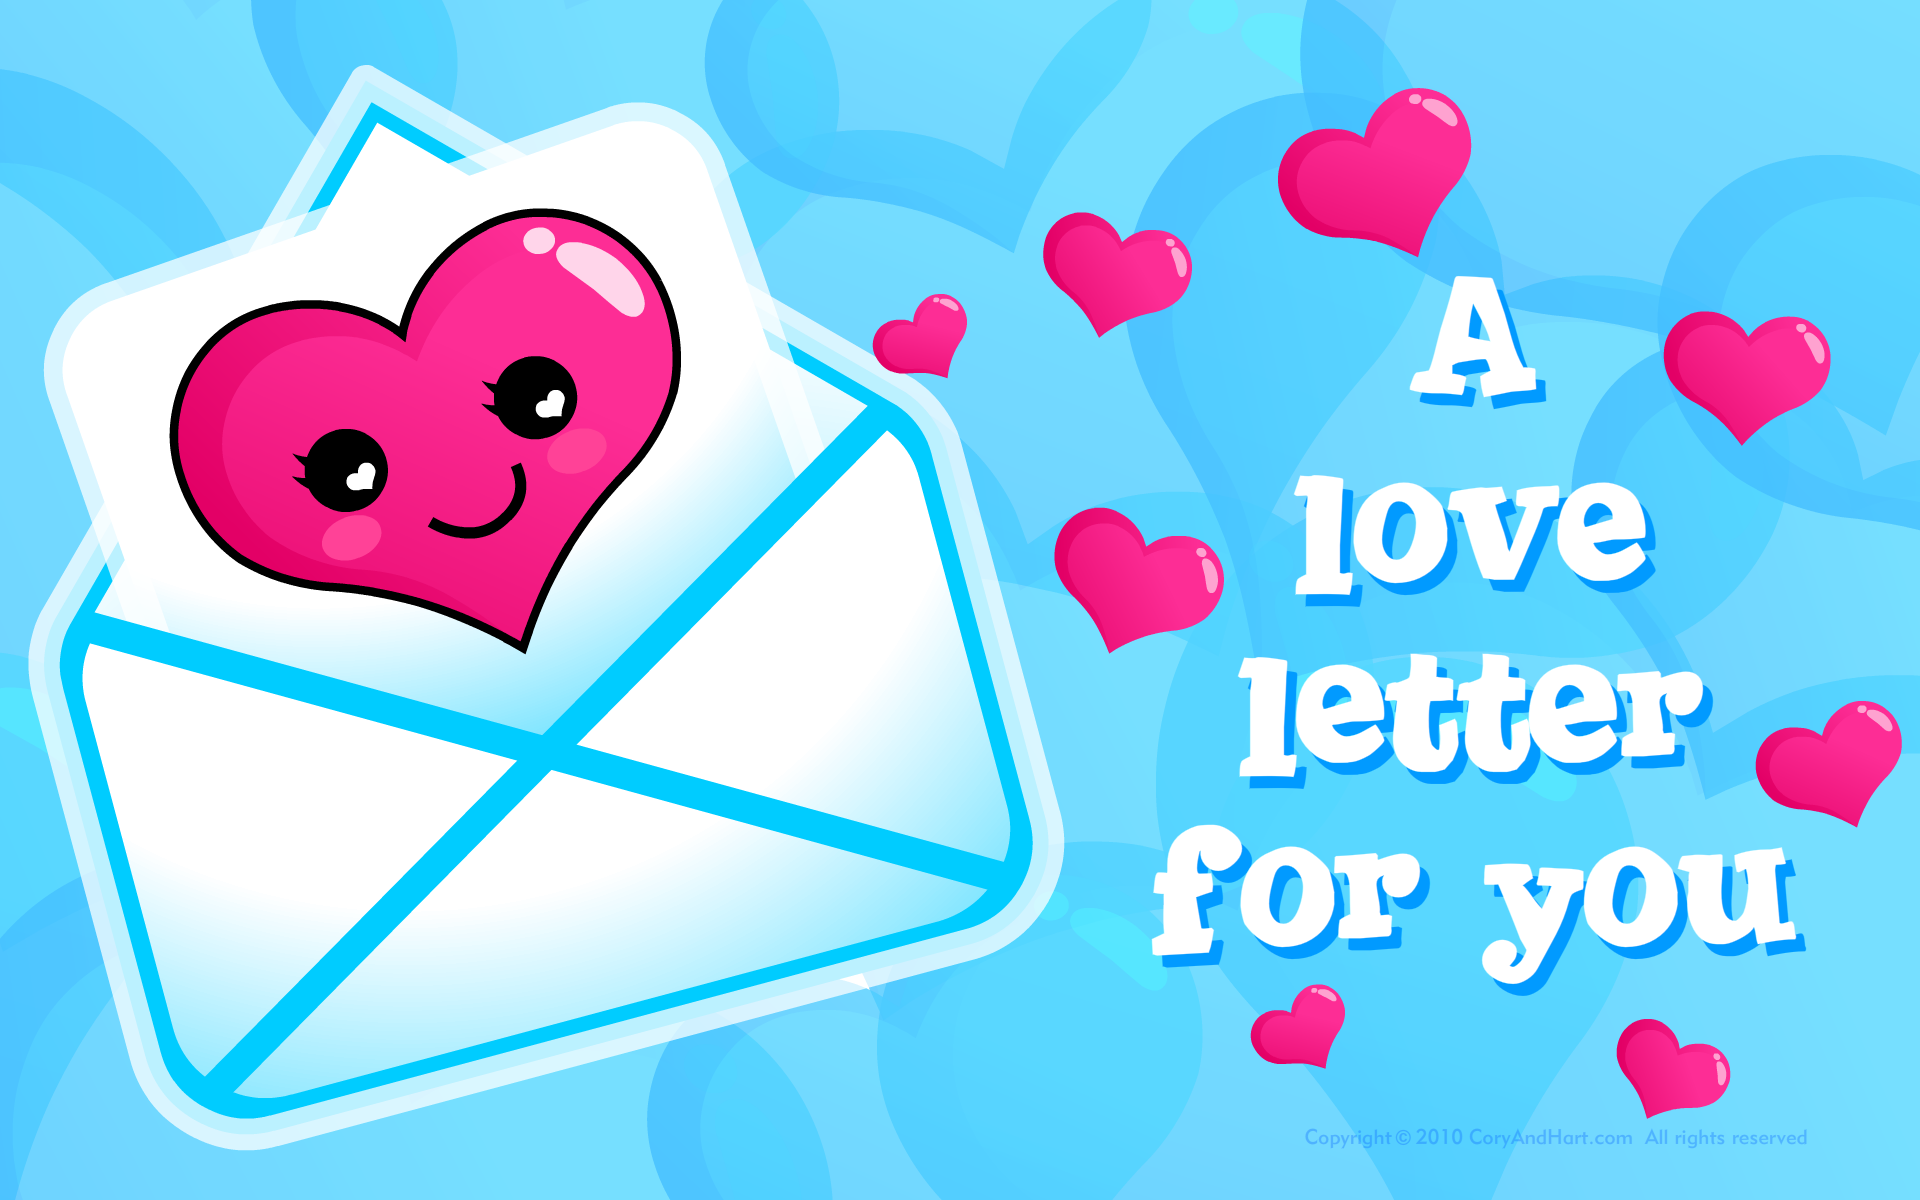 Love Letter For You - 1920x1200 Wallpaper 